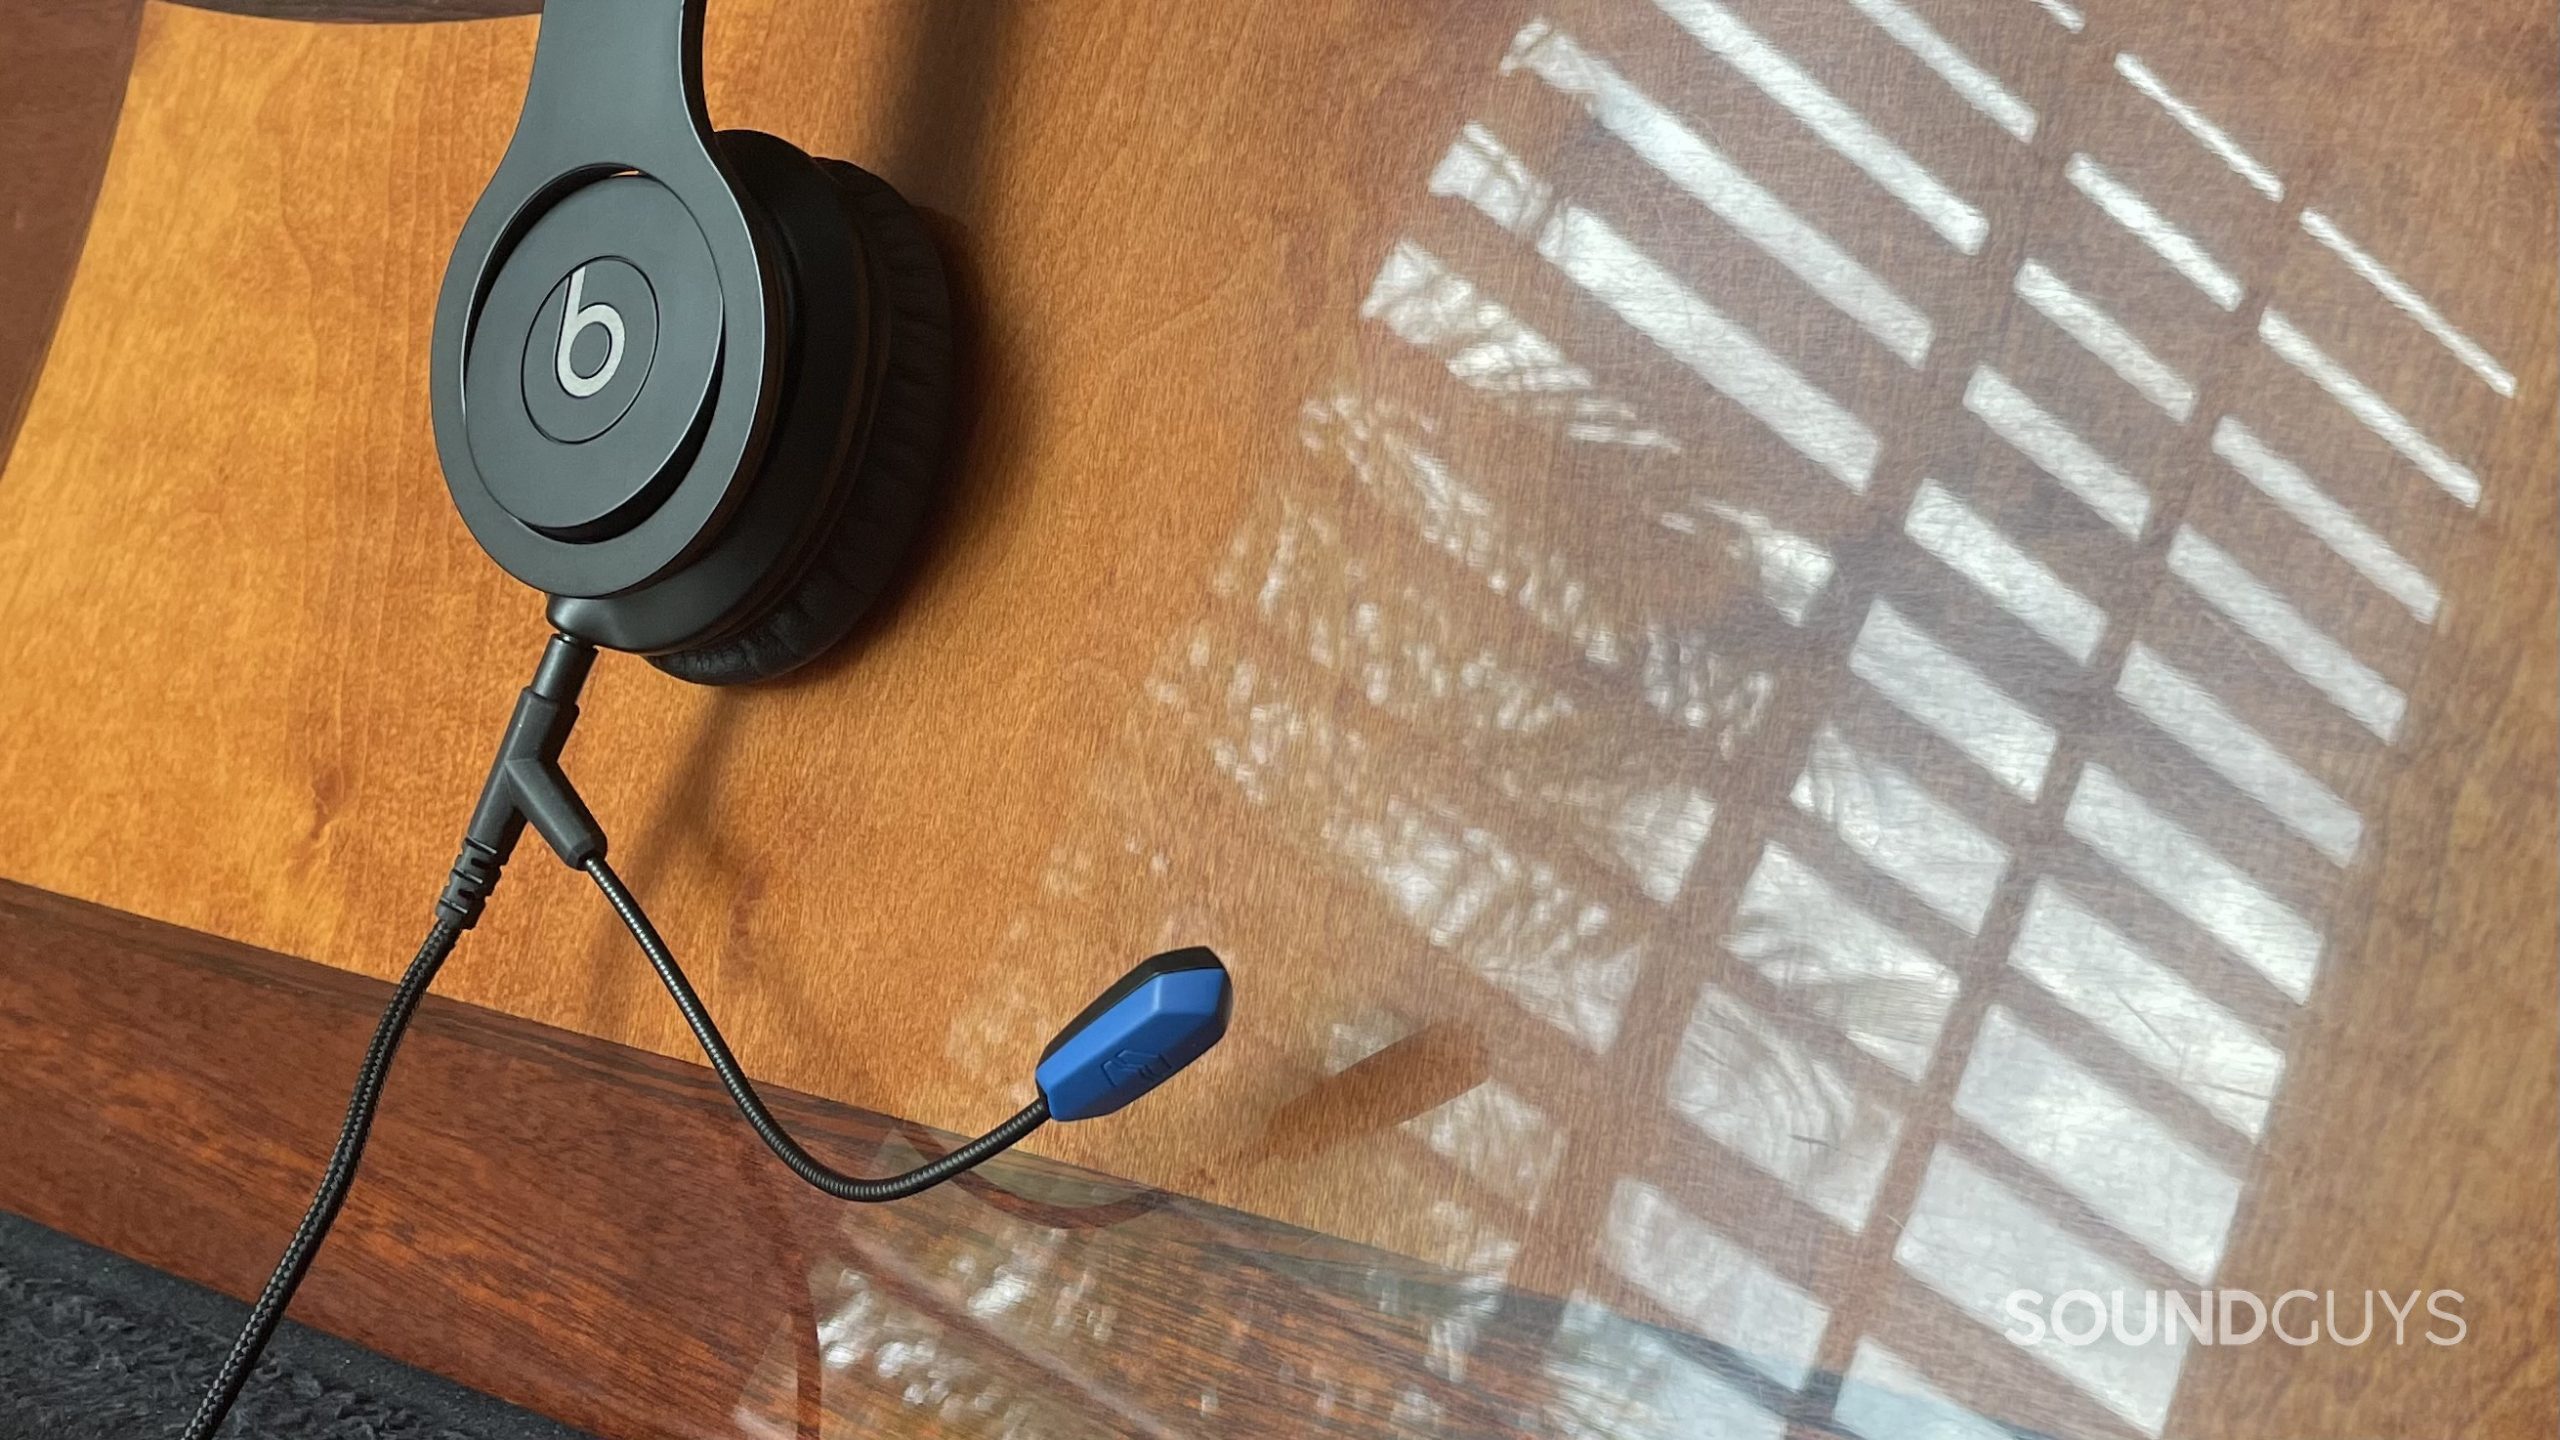 Beats headphones and V-MODA BoomPro X microphone against a reflective wooden surface.